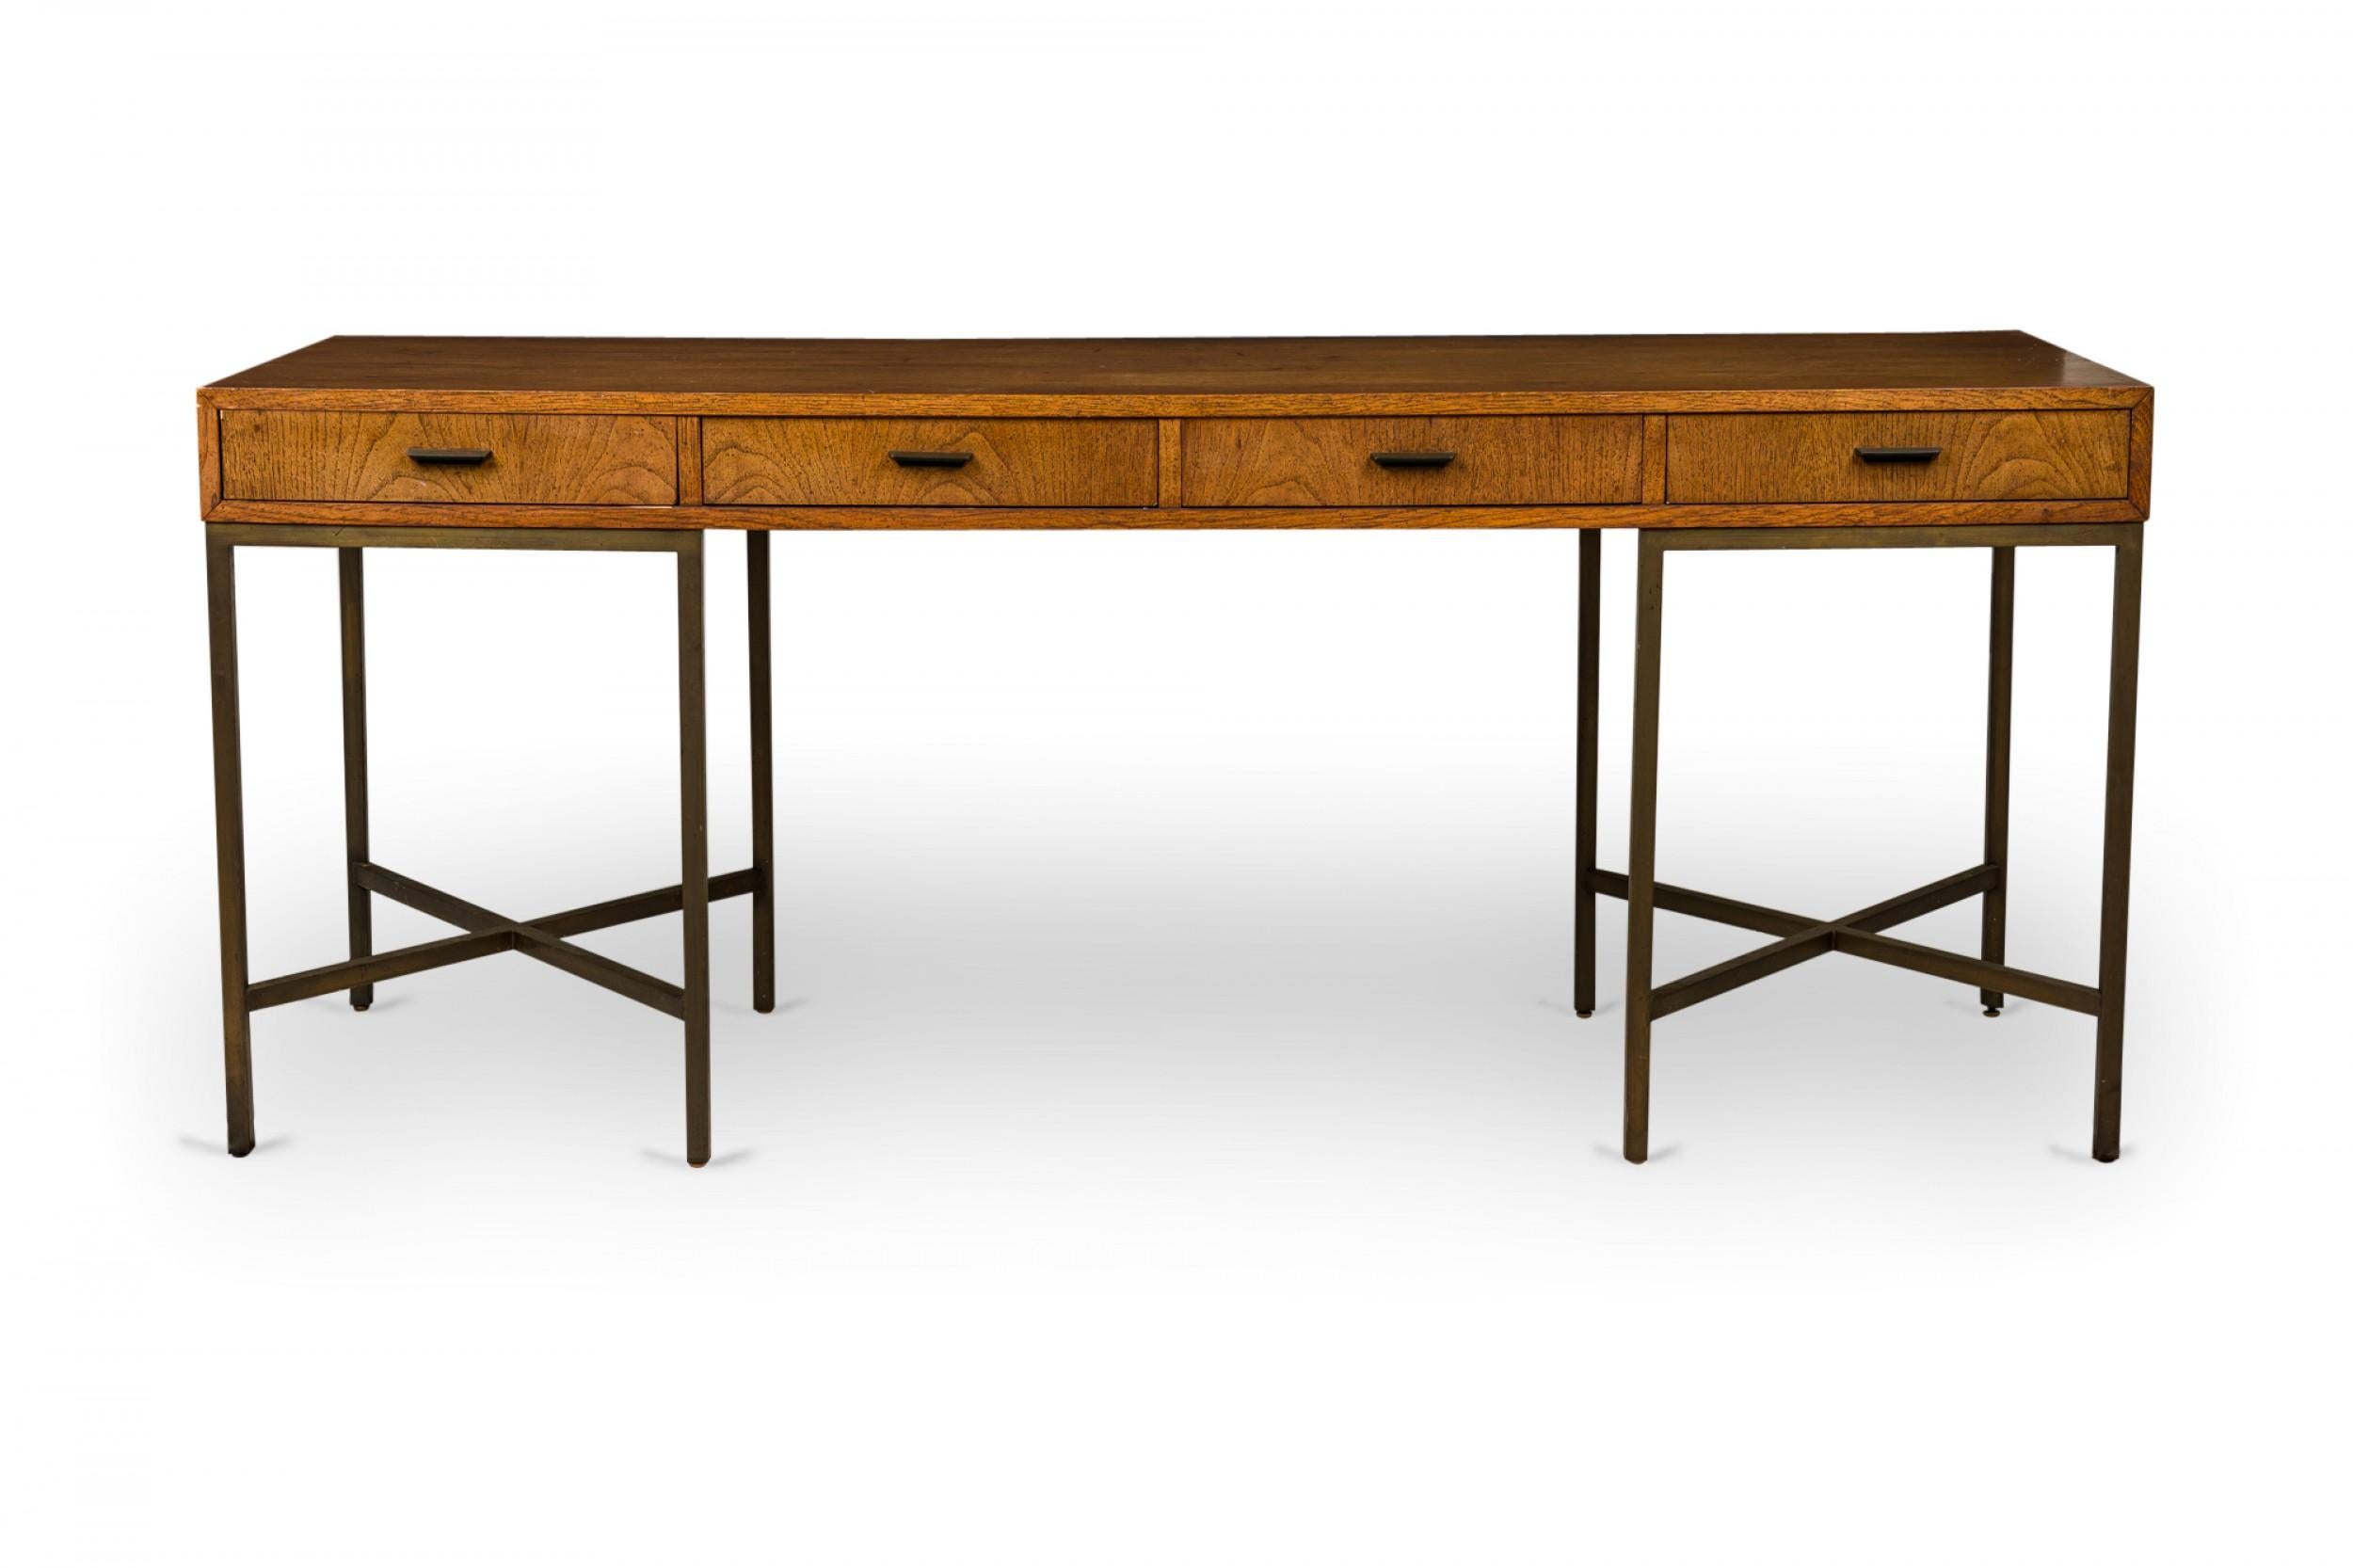 American Mid-Century desk with a rectangular walnut top containing four drawers with bronze horizontal bar drawer pulls, supported on two sets of four bronze legs on either side with independent stretcher bases. (FOUNDERS FURNITURE CO.).
 